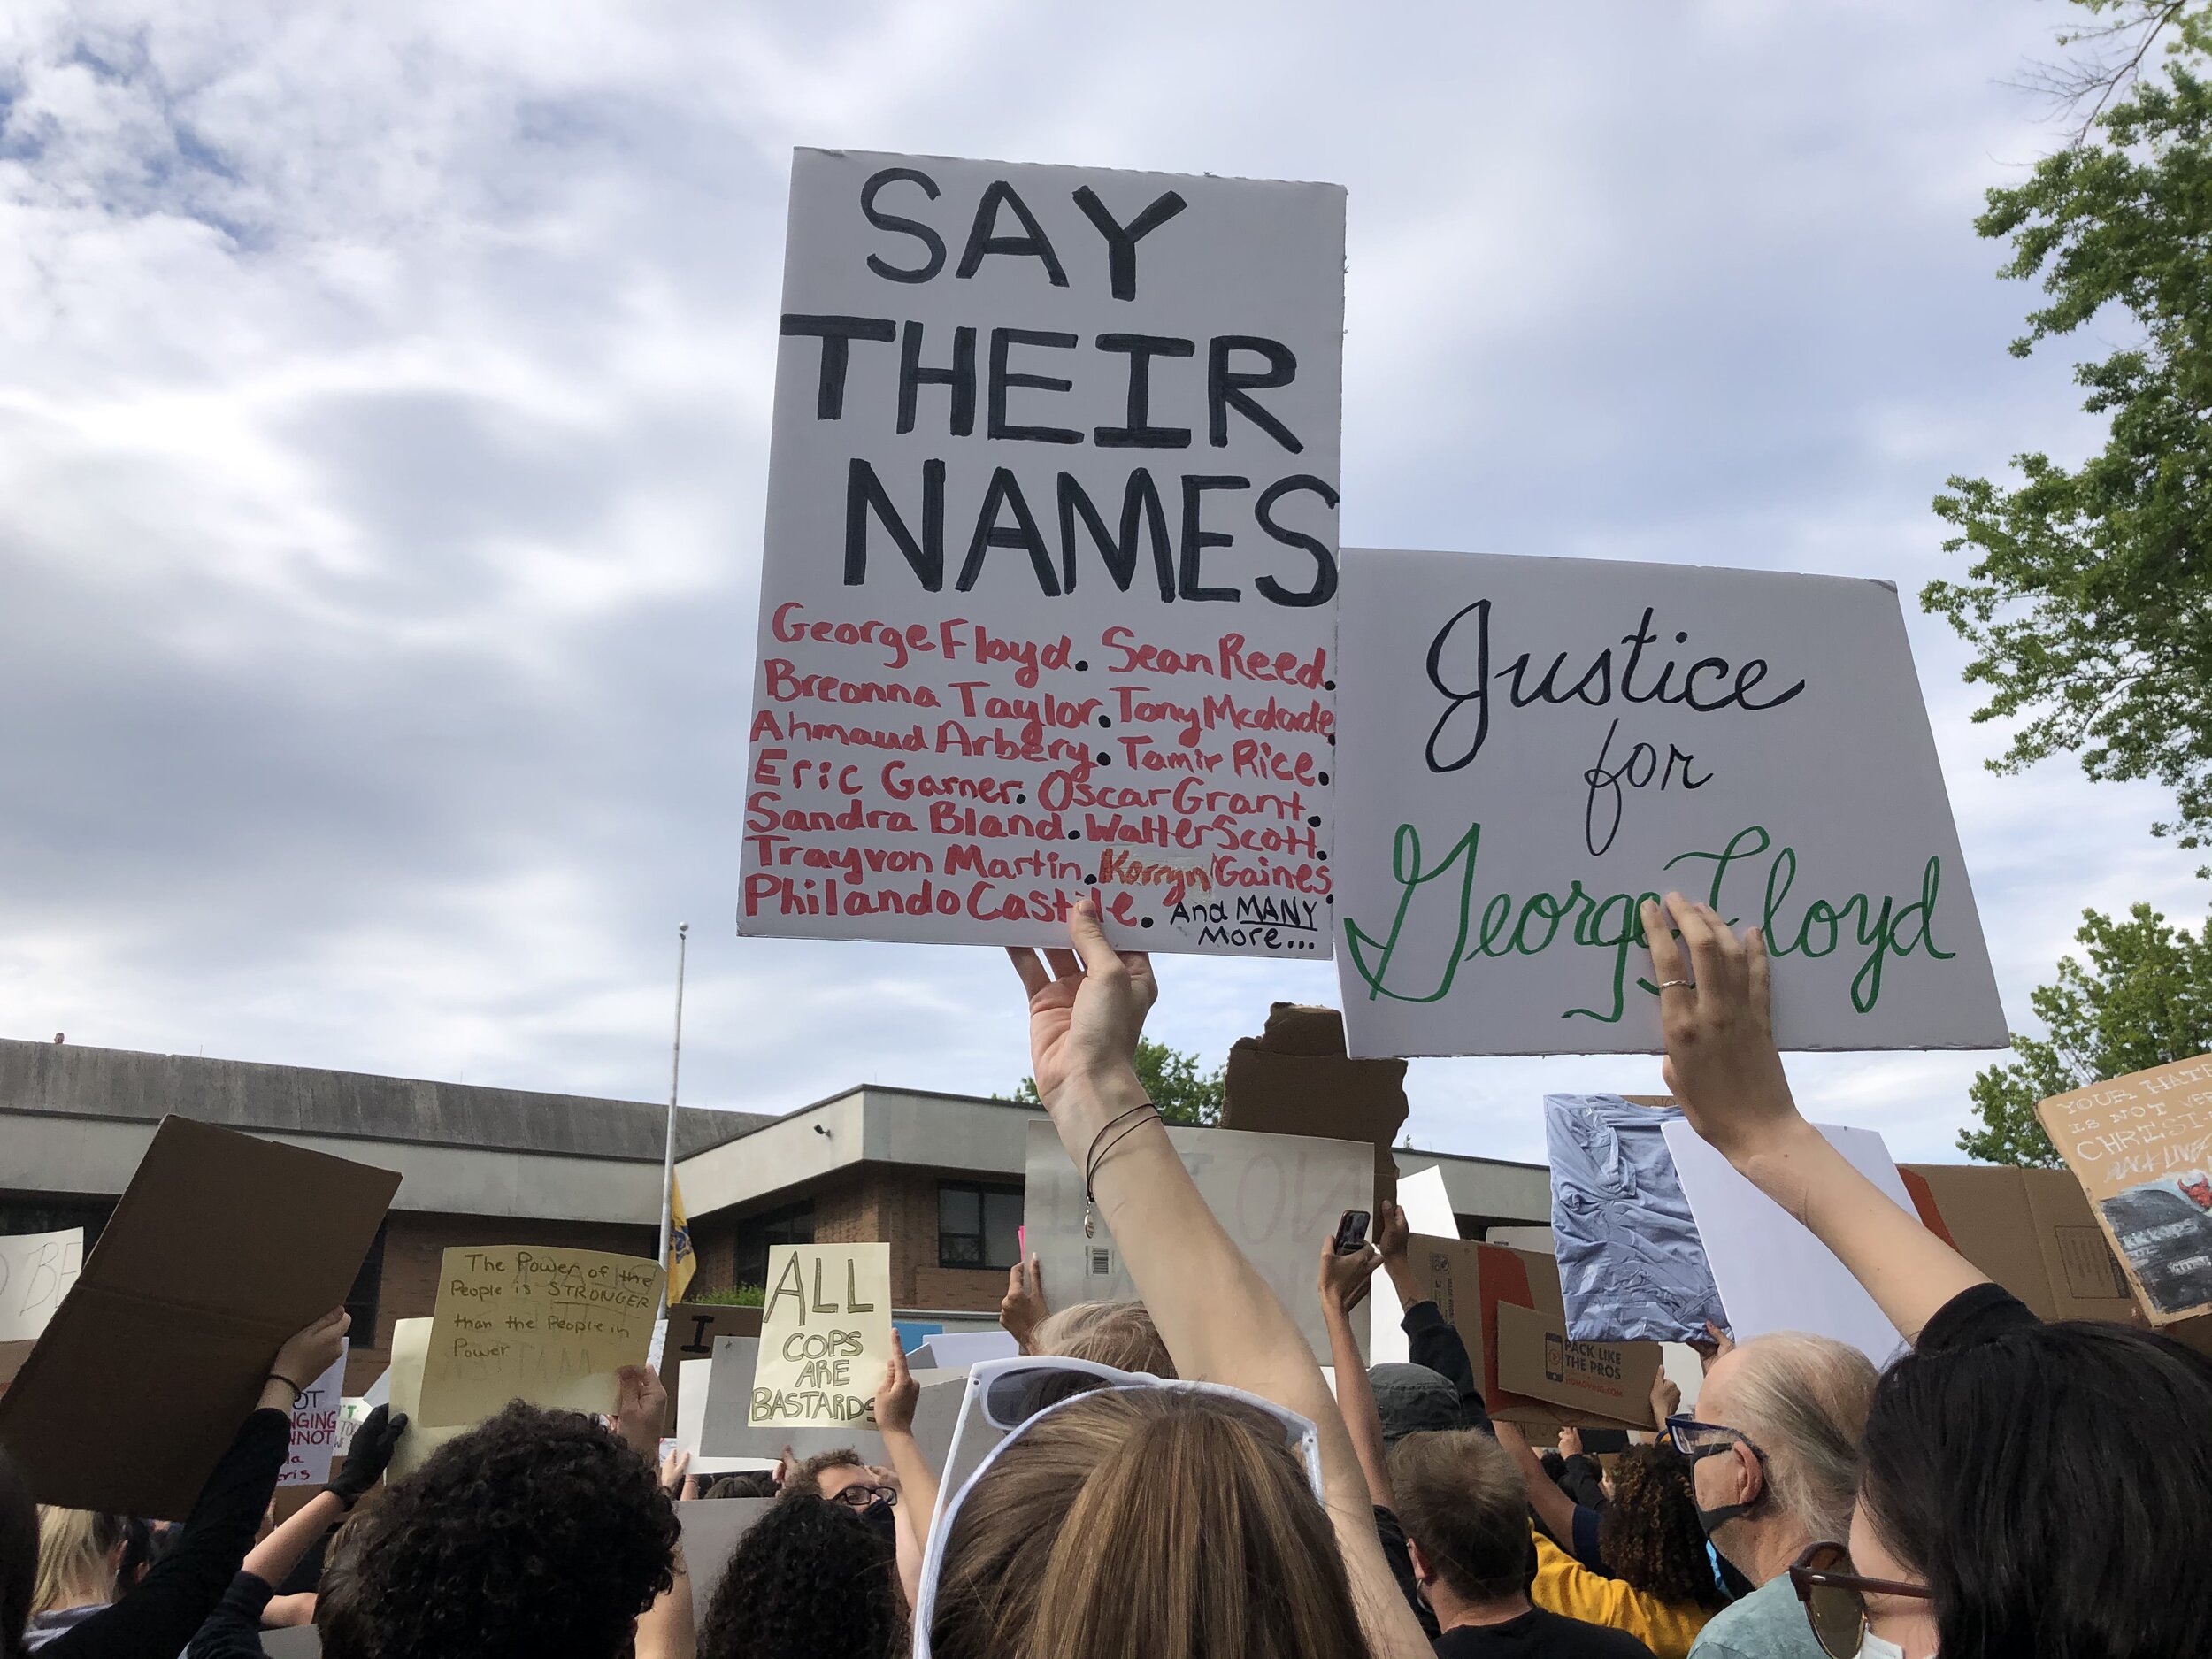  Protestors holding up signs at a rally in Clifton, New Jersey on Tuesday, June 2, 2020.  Photo by: Gab Varano  